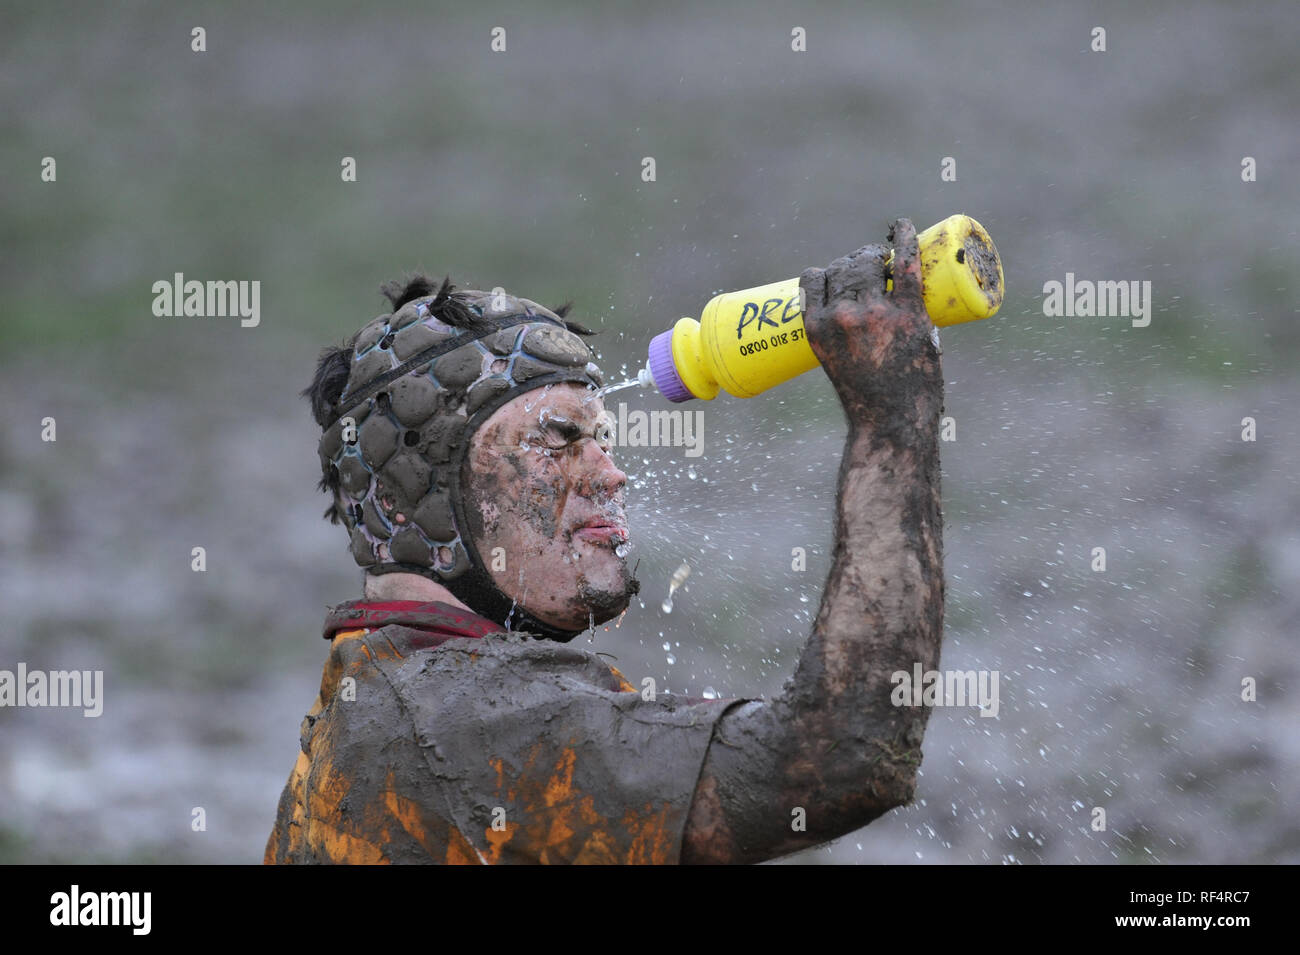 Muddy rugby union player washes face Stock Photo